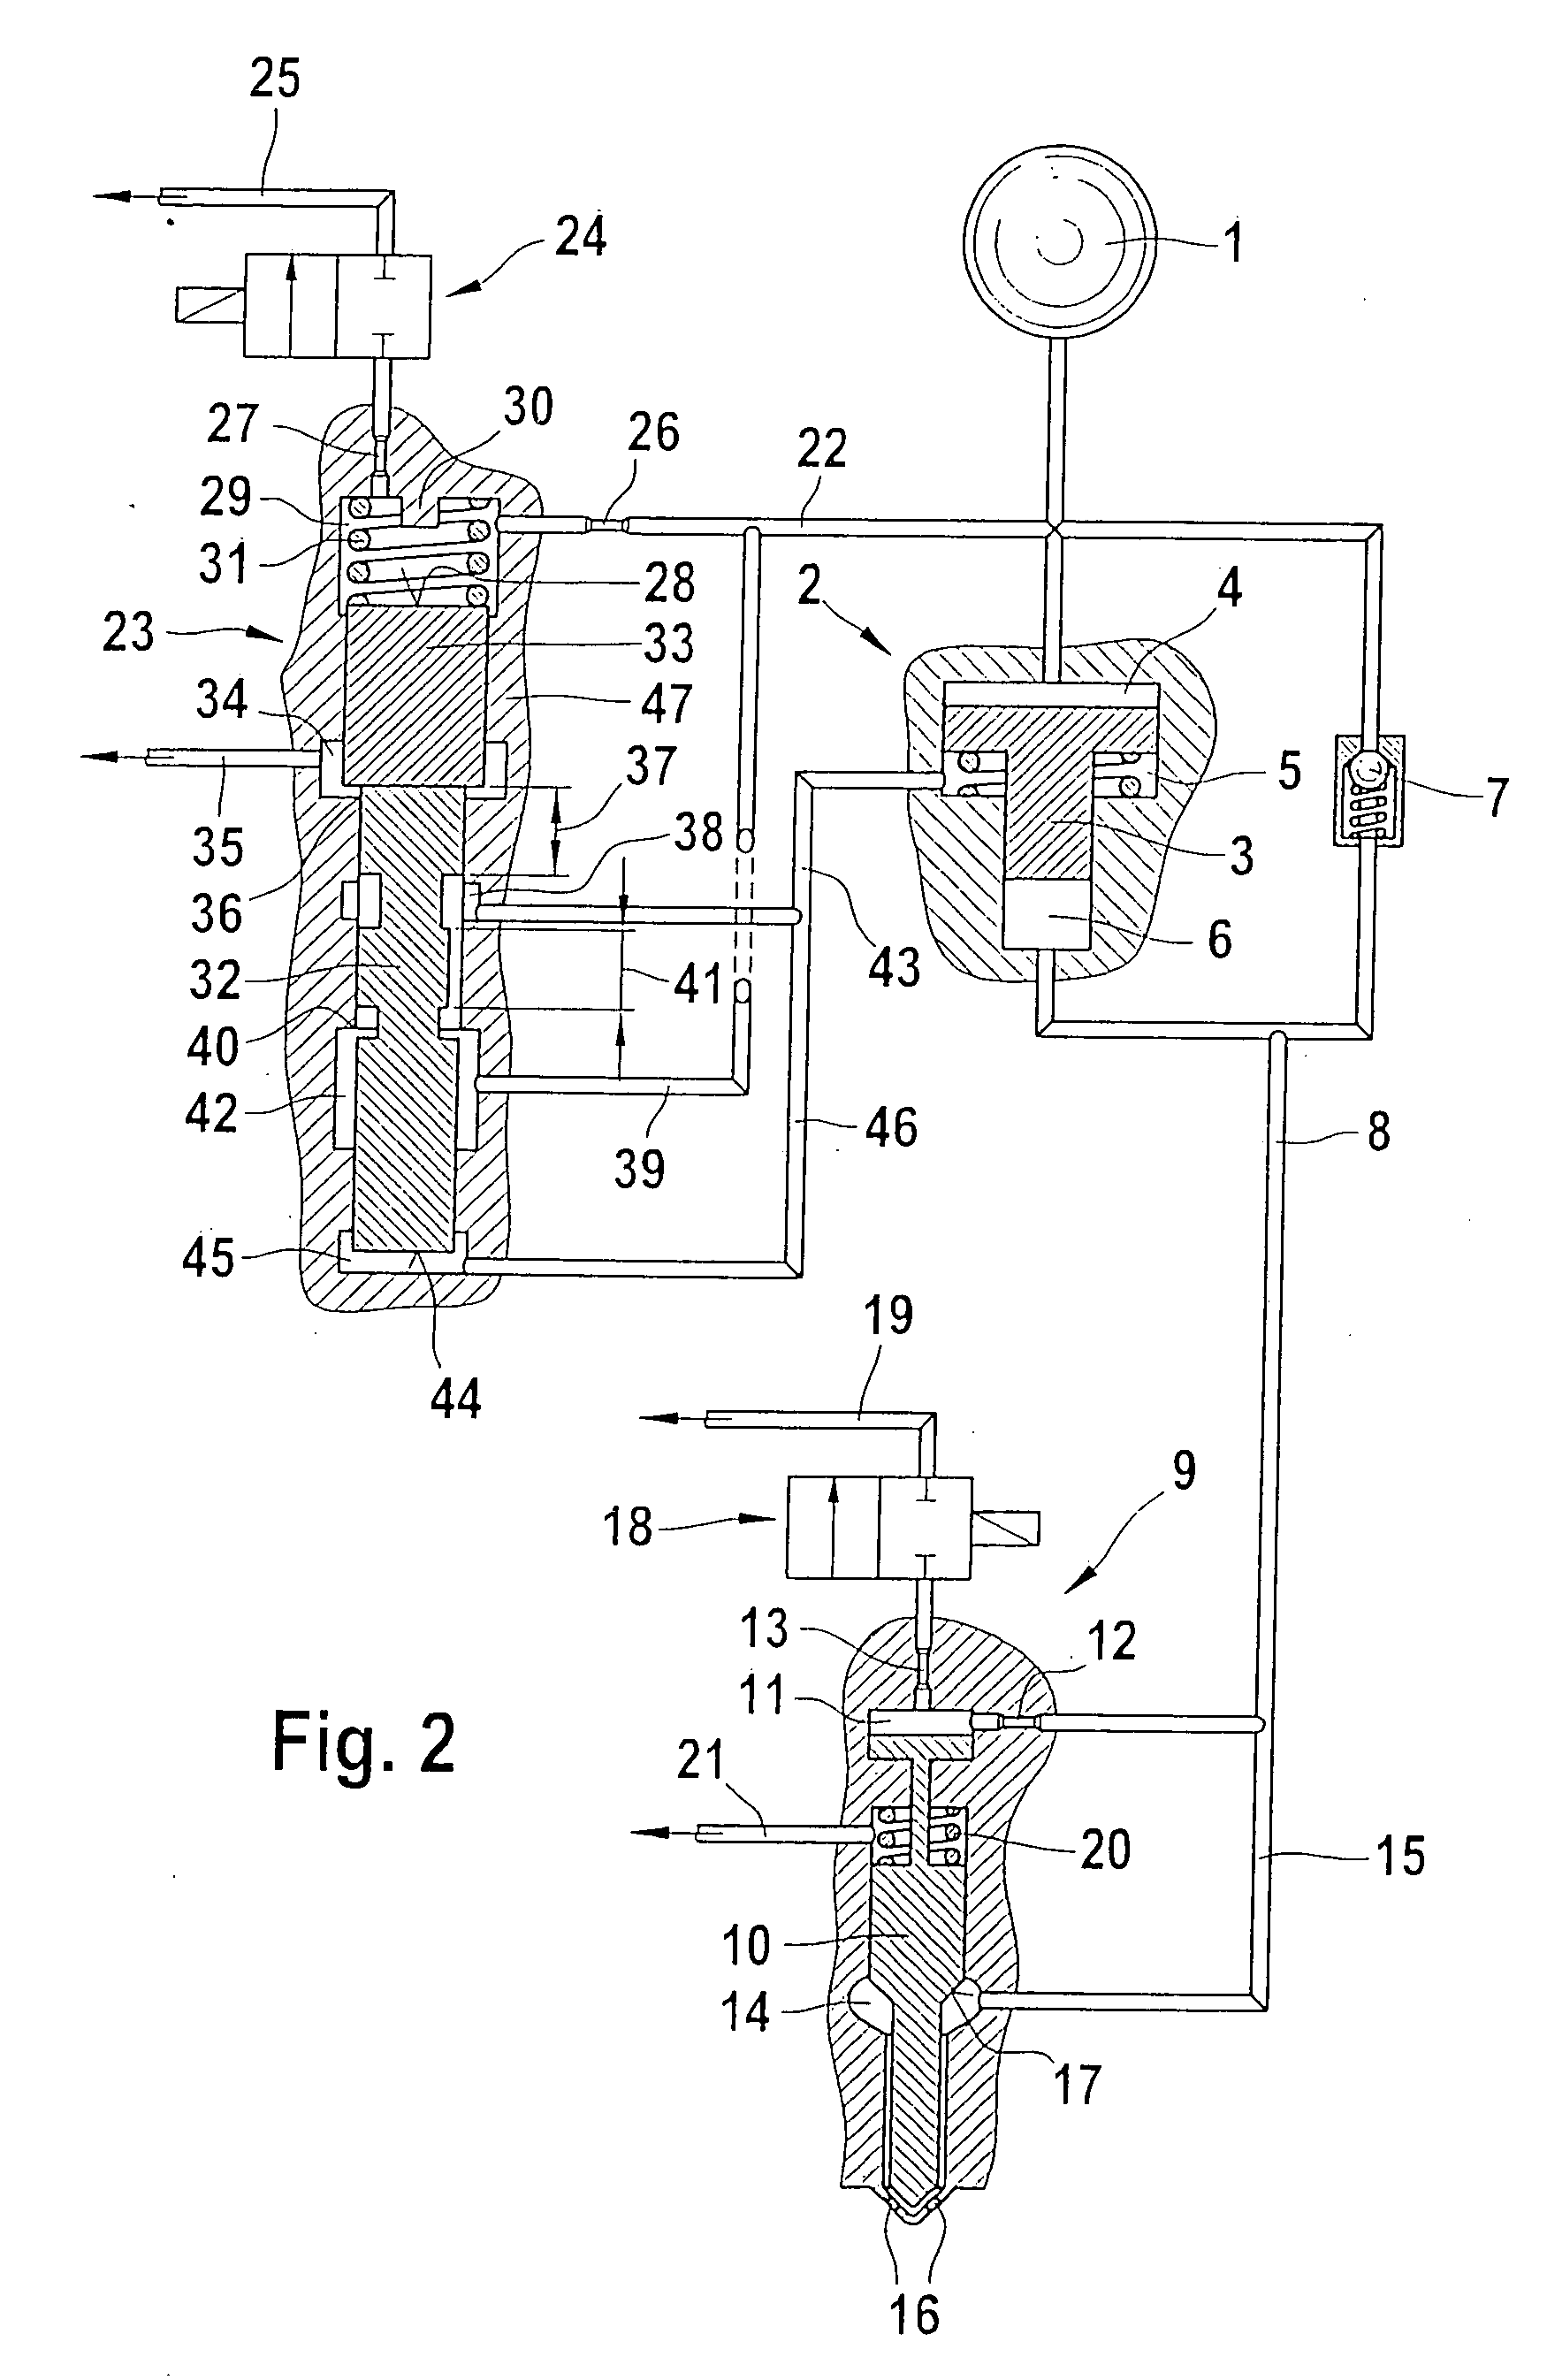 Control valve for a fuel injector that contains a pressure intensifier